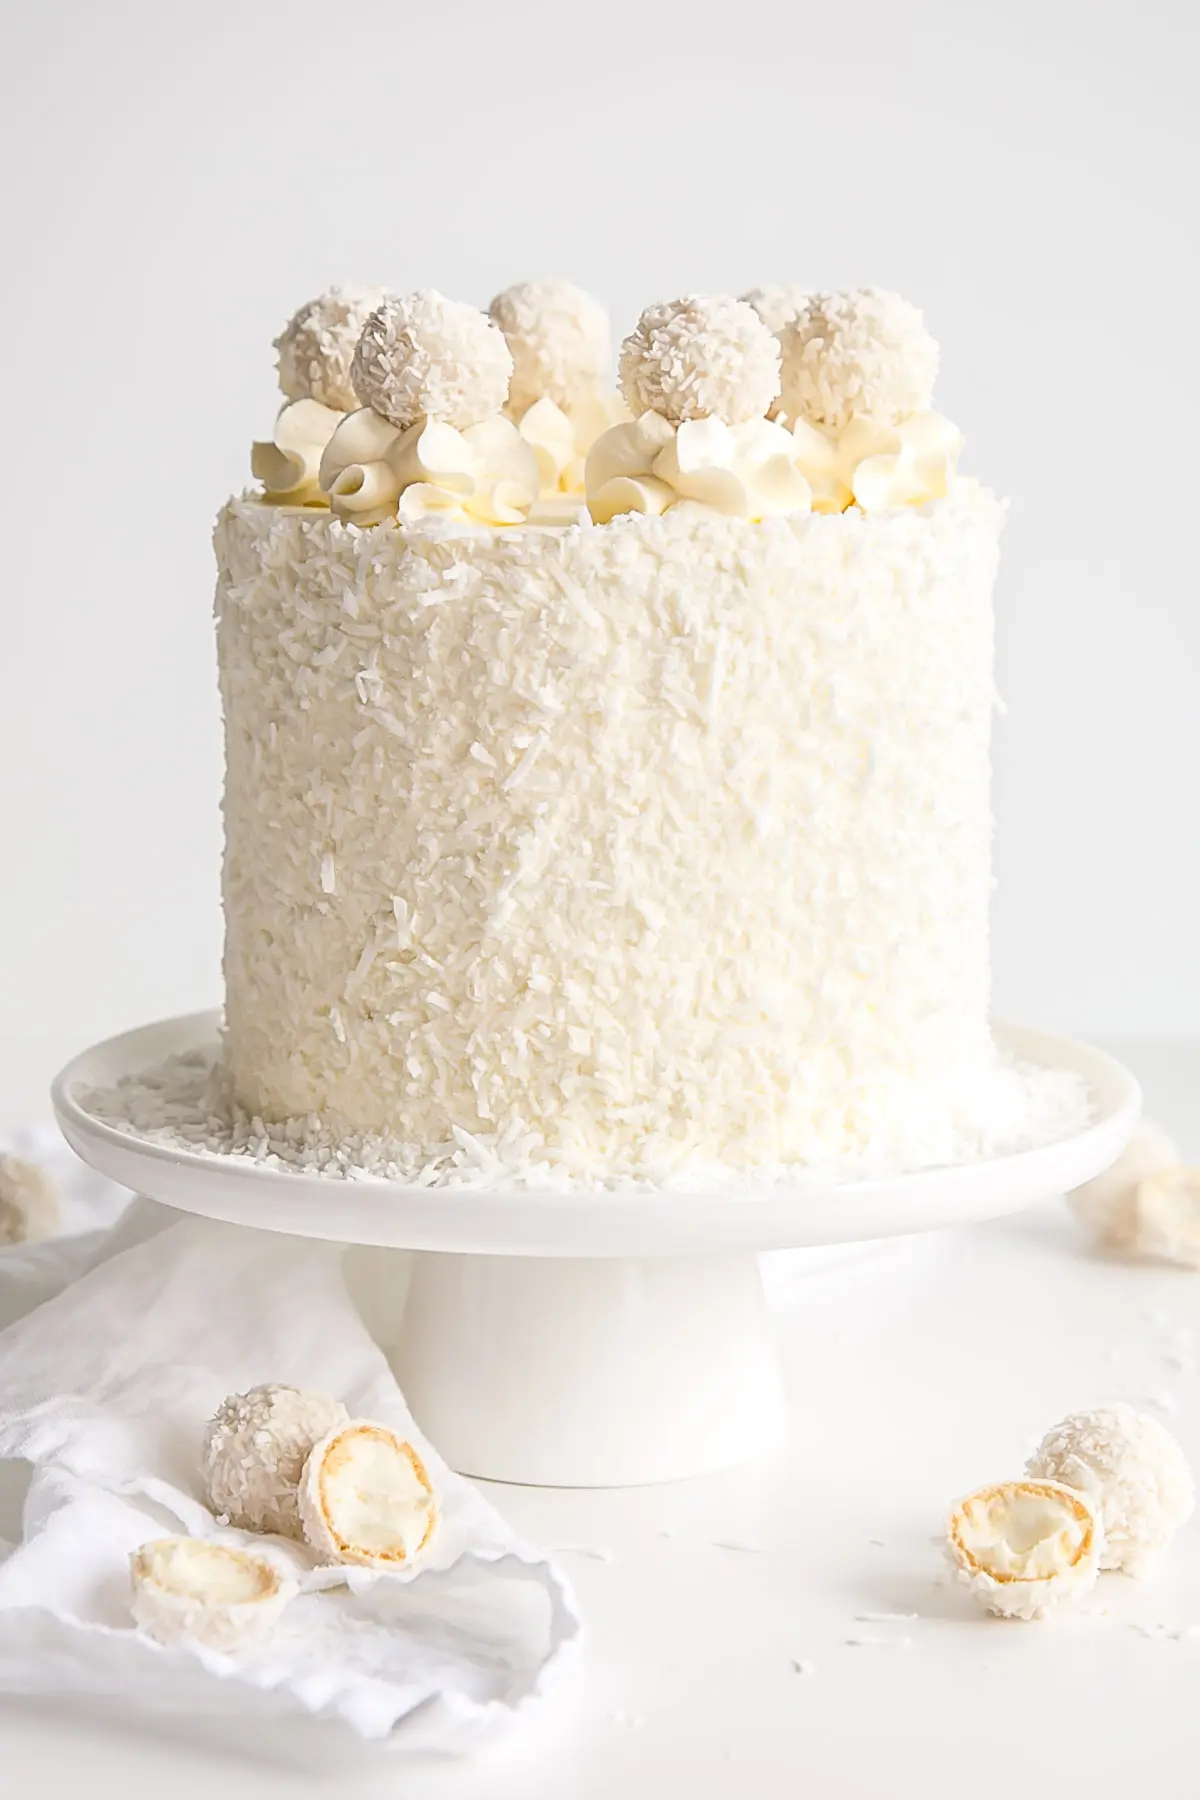 Coconut Almond Cake covered with shredded coconut.